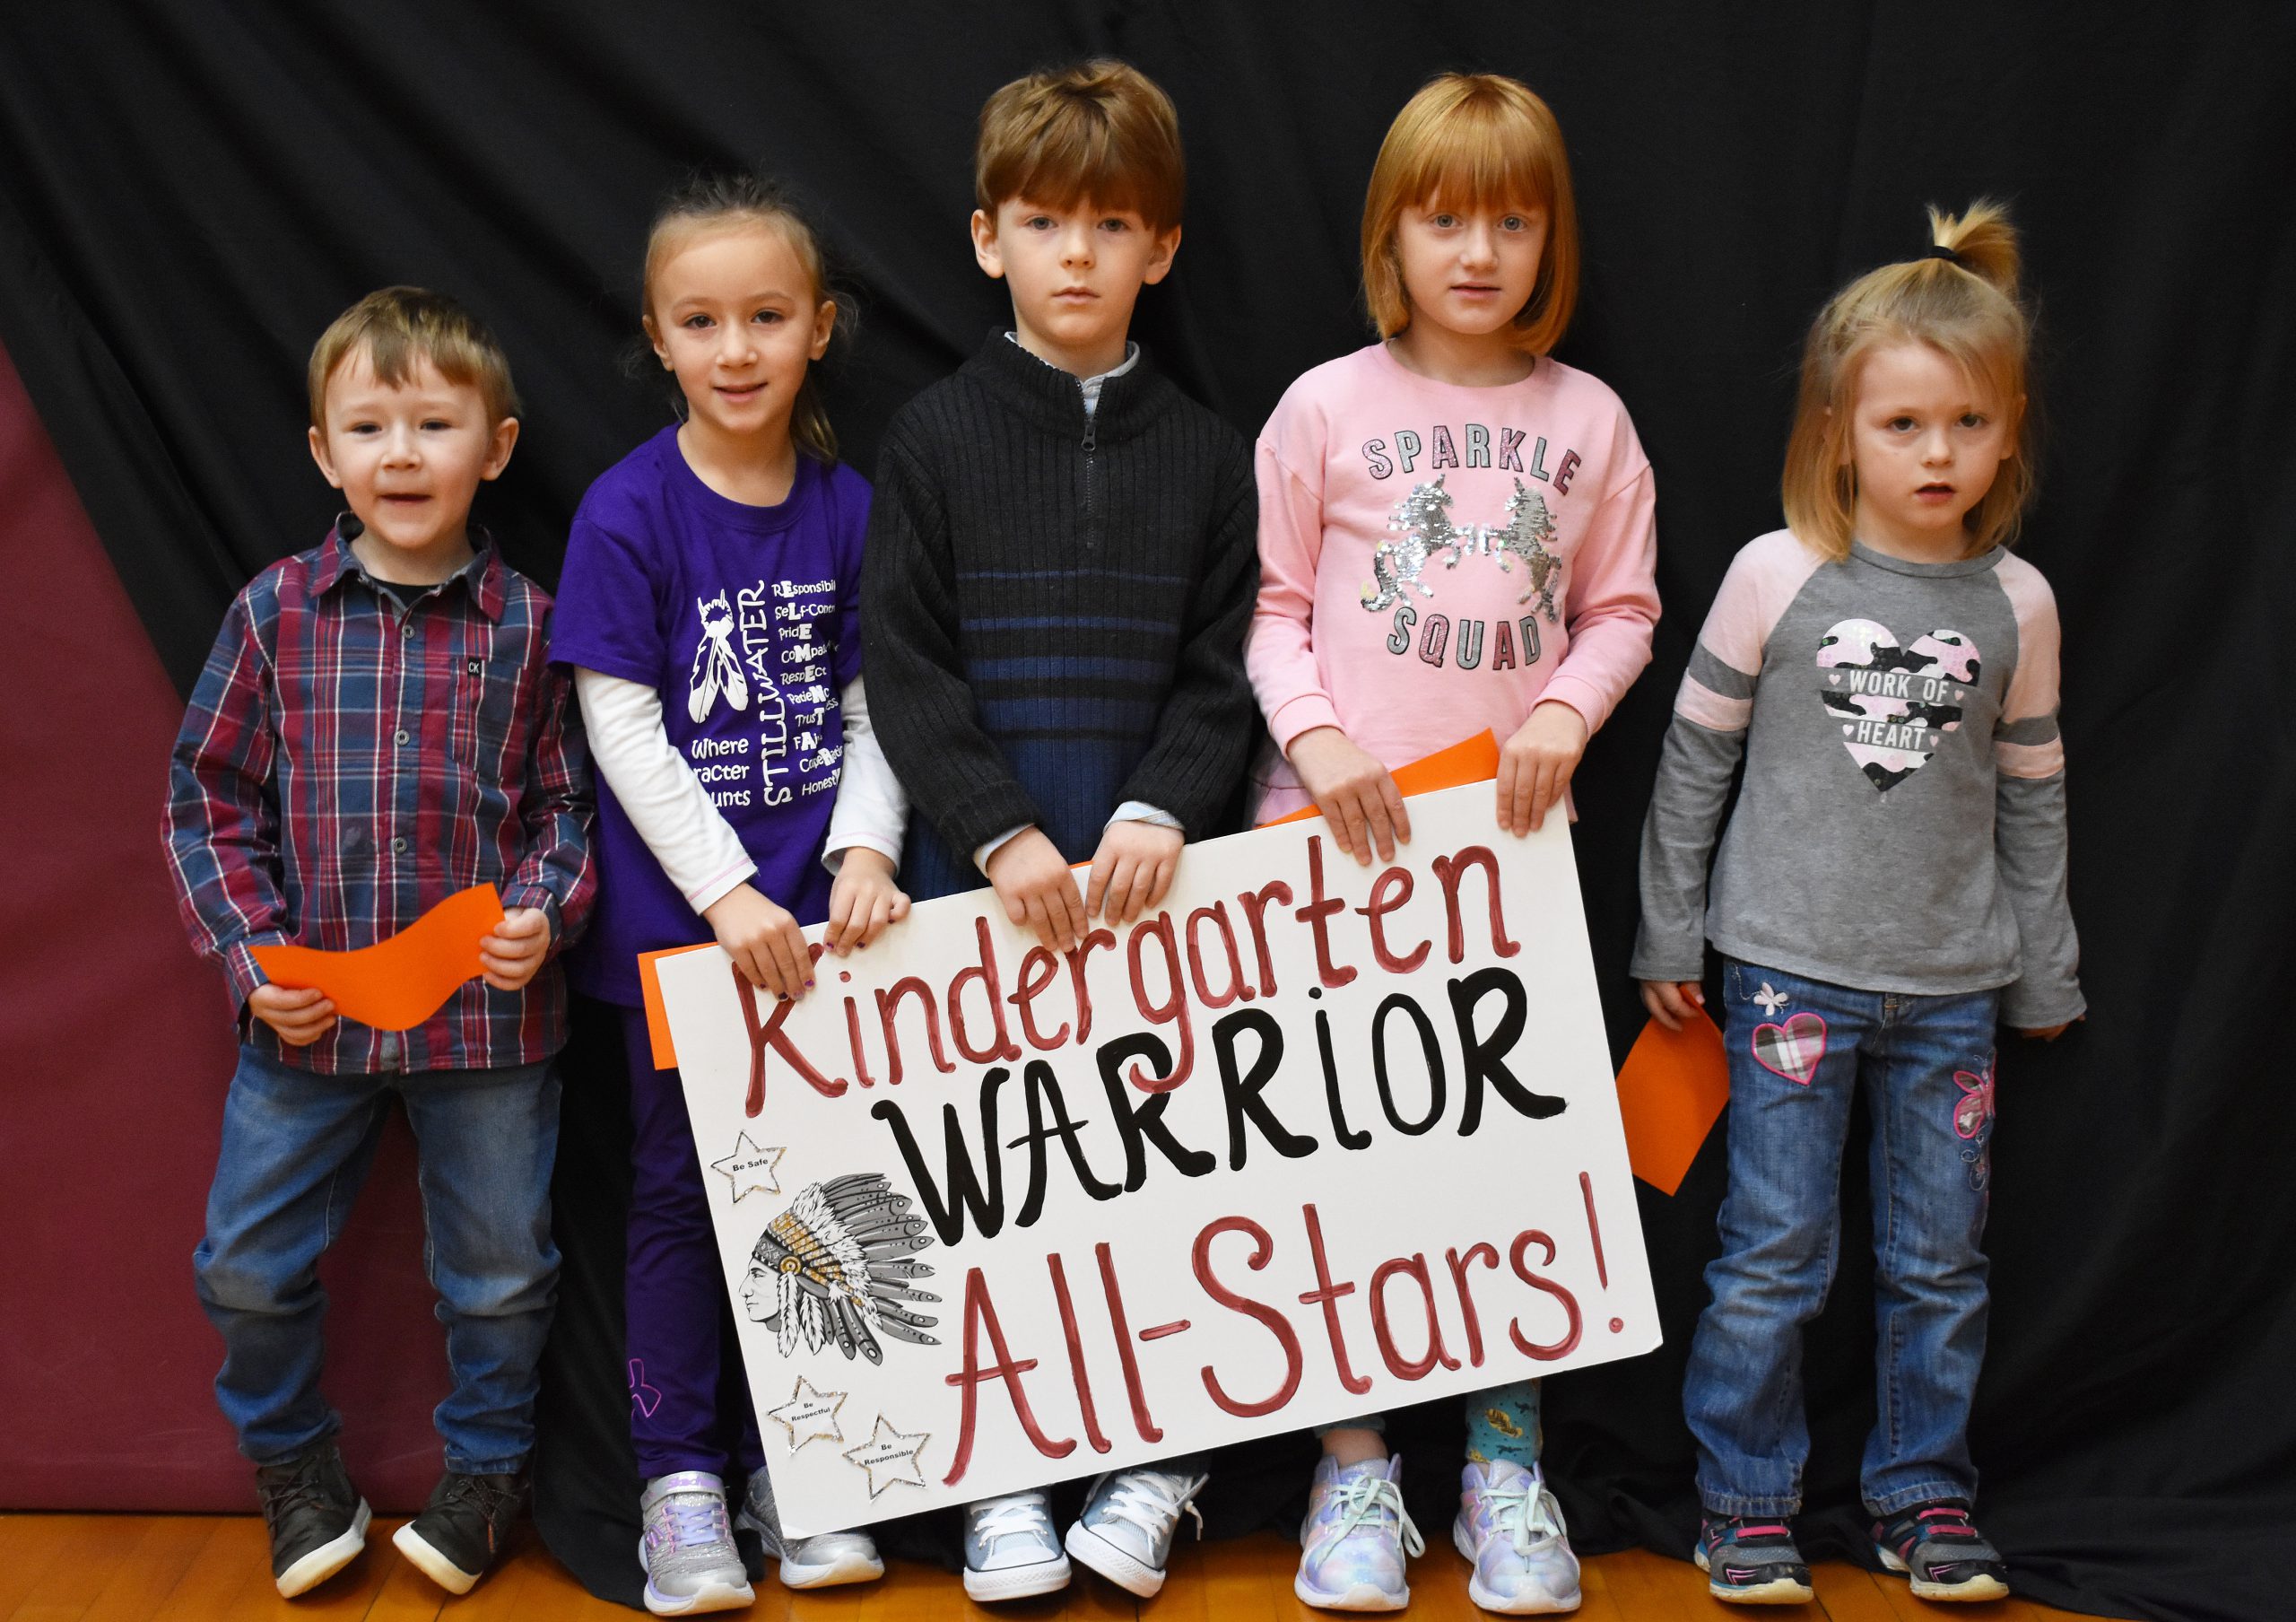 Students lined up with the kindergarten warrior sign